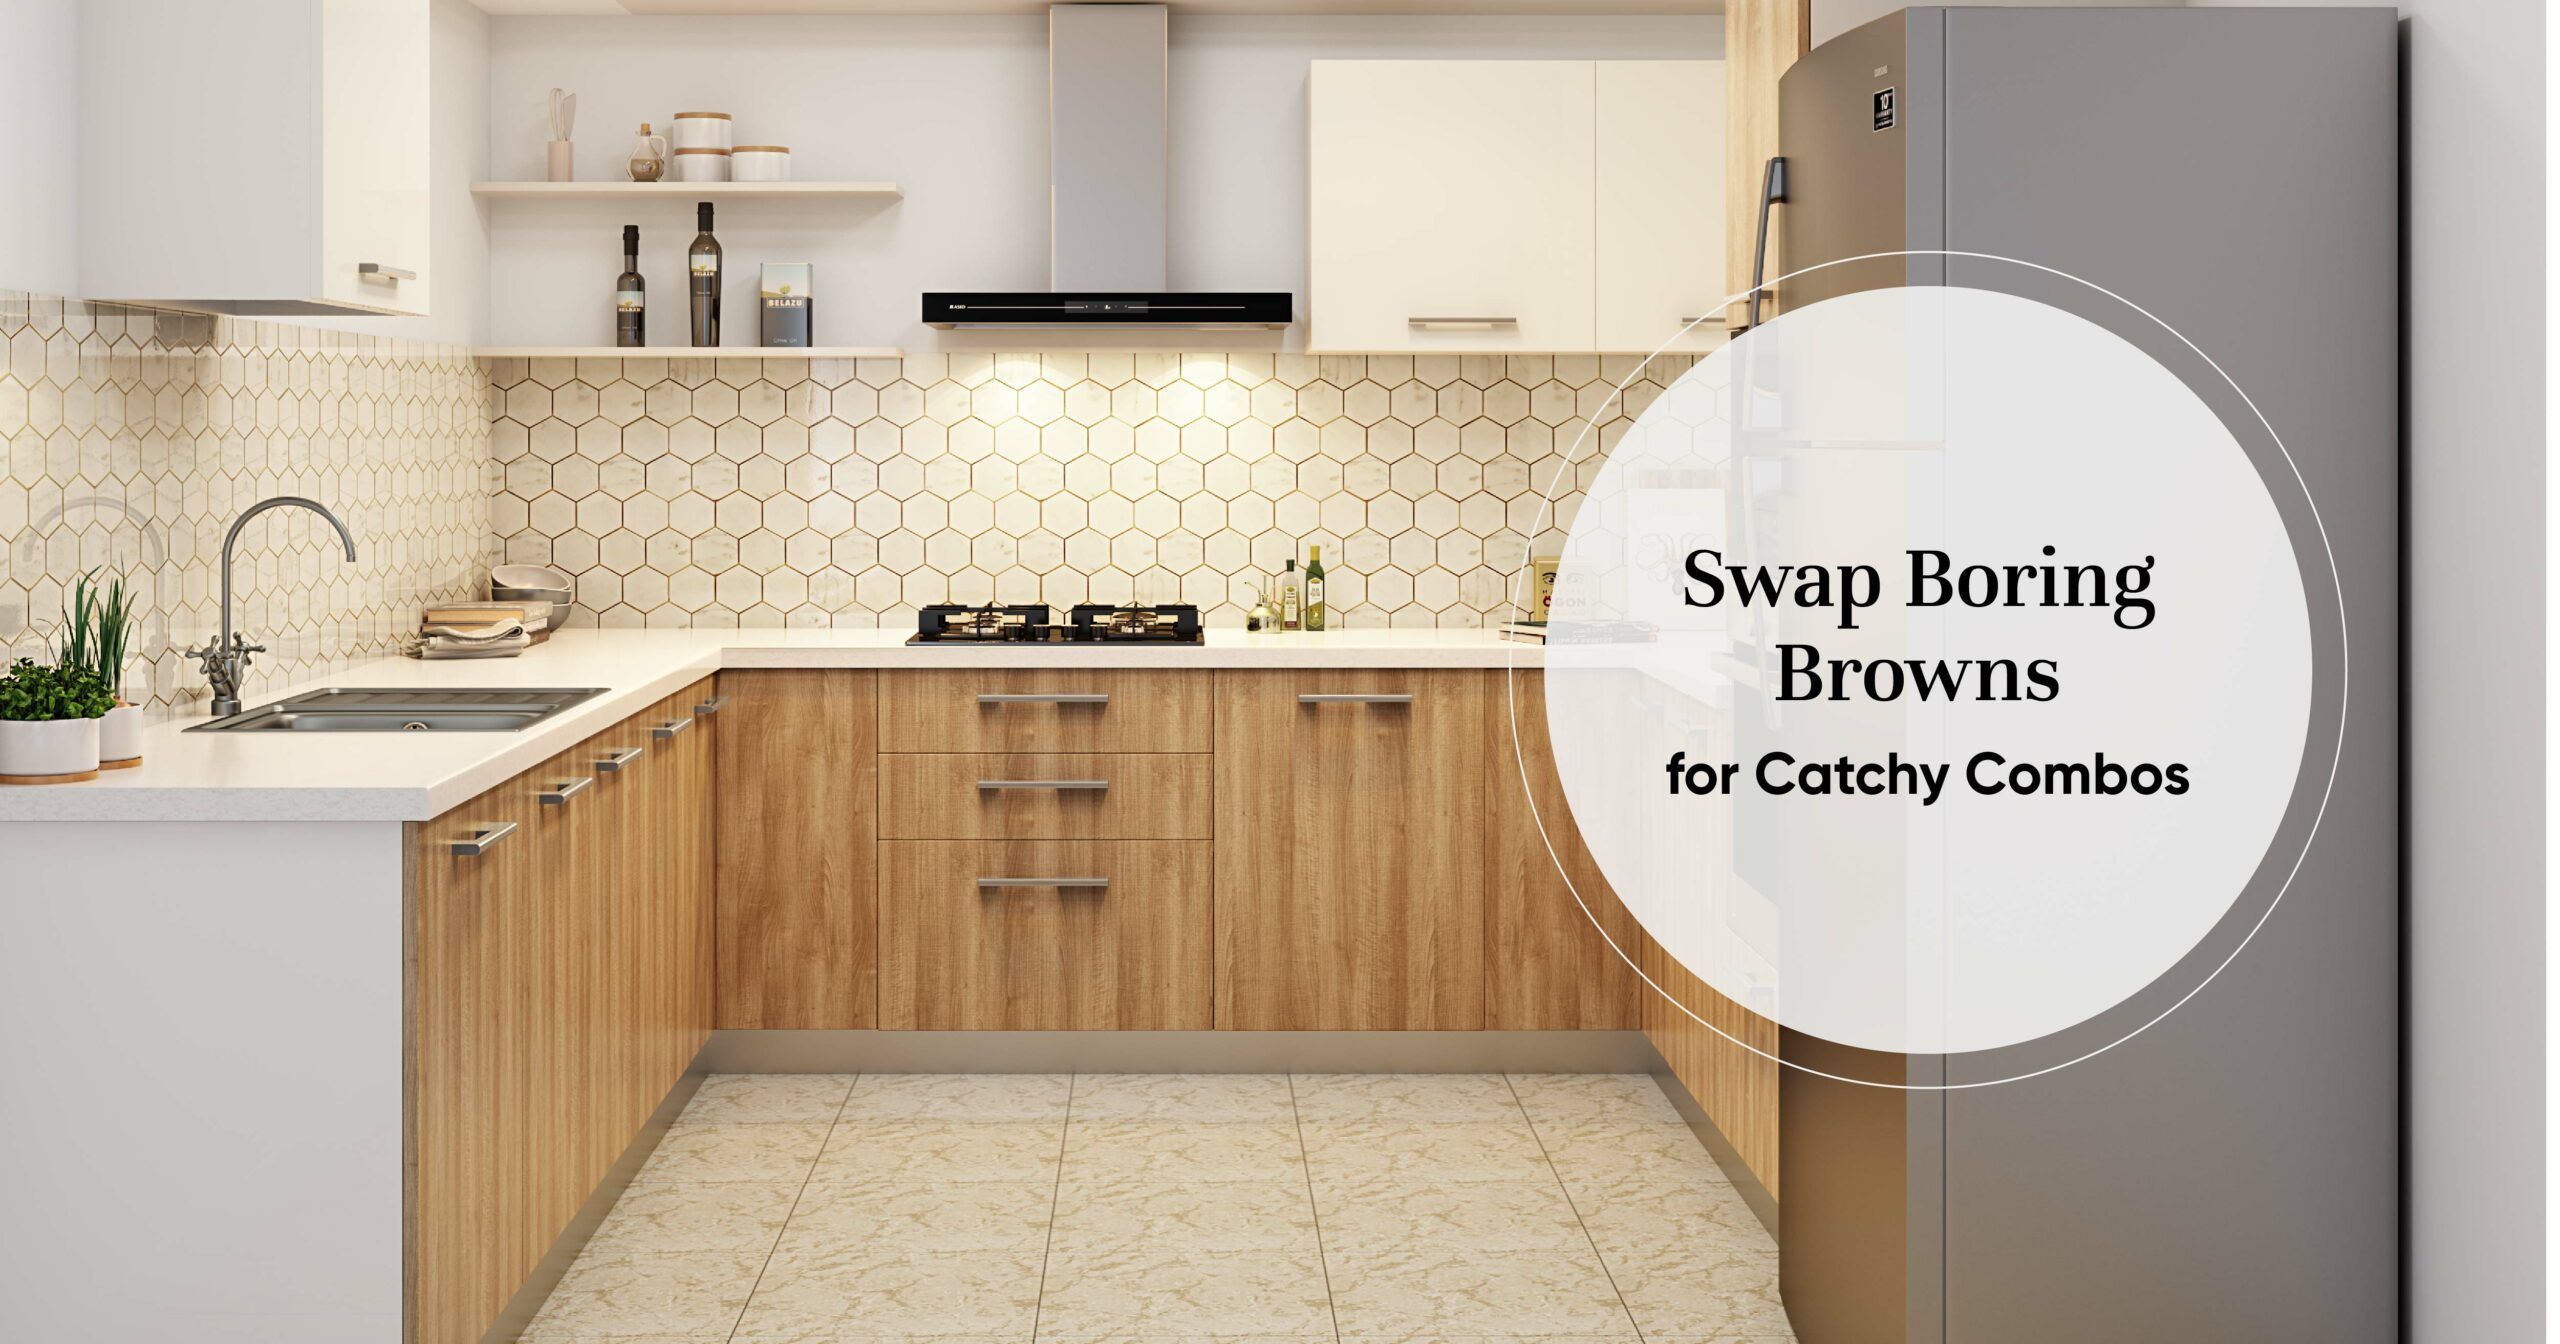 Which Colour Pairs Best With Brown Kitchens?